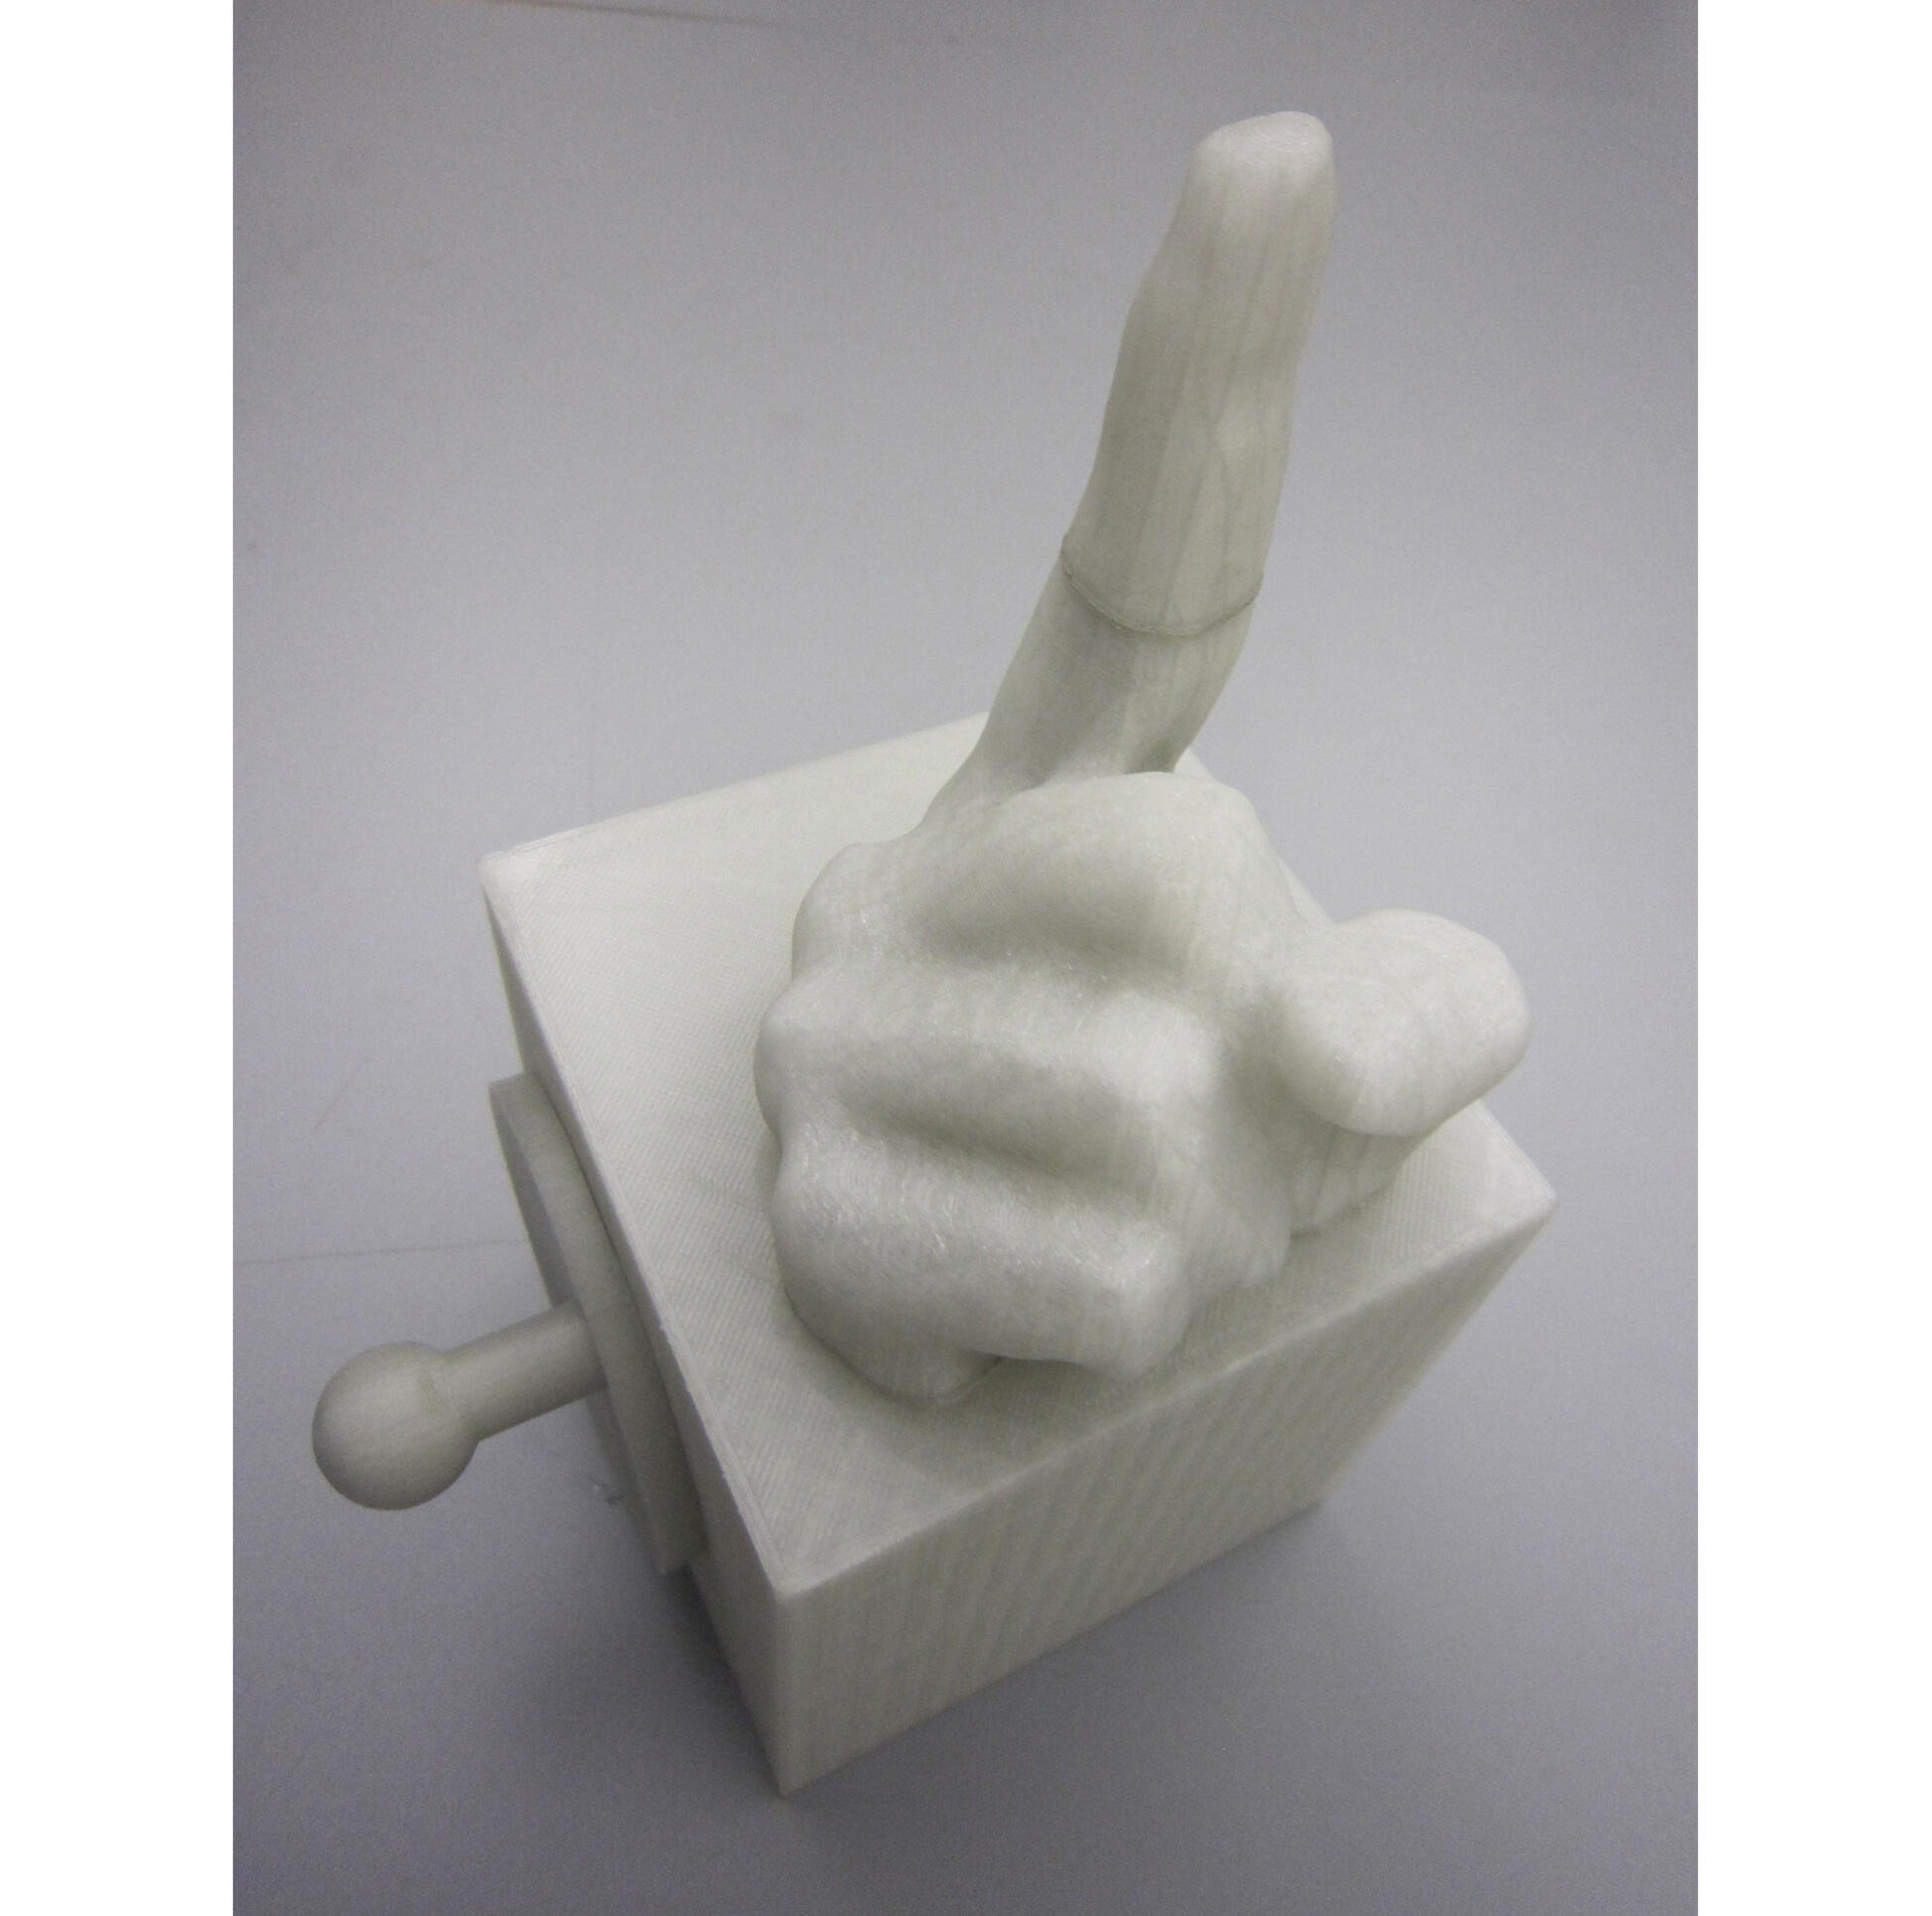 Sculpture of hand ; Zachary North